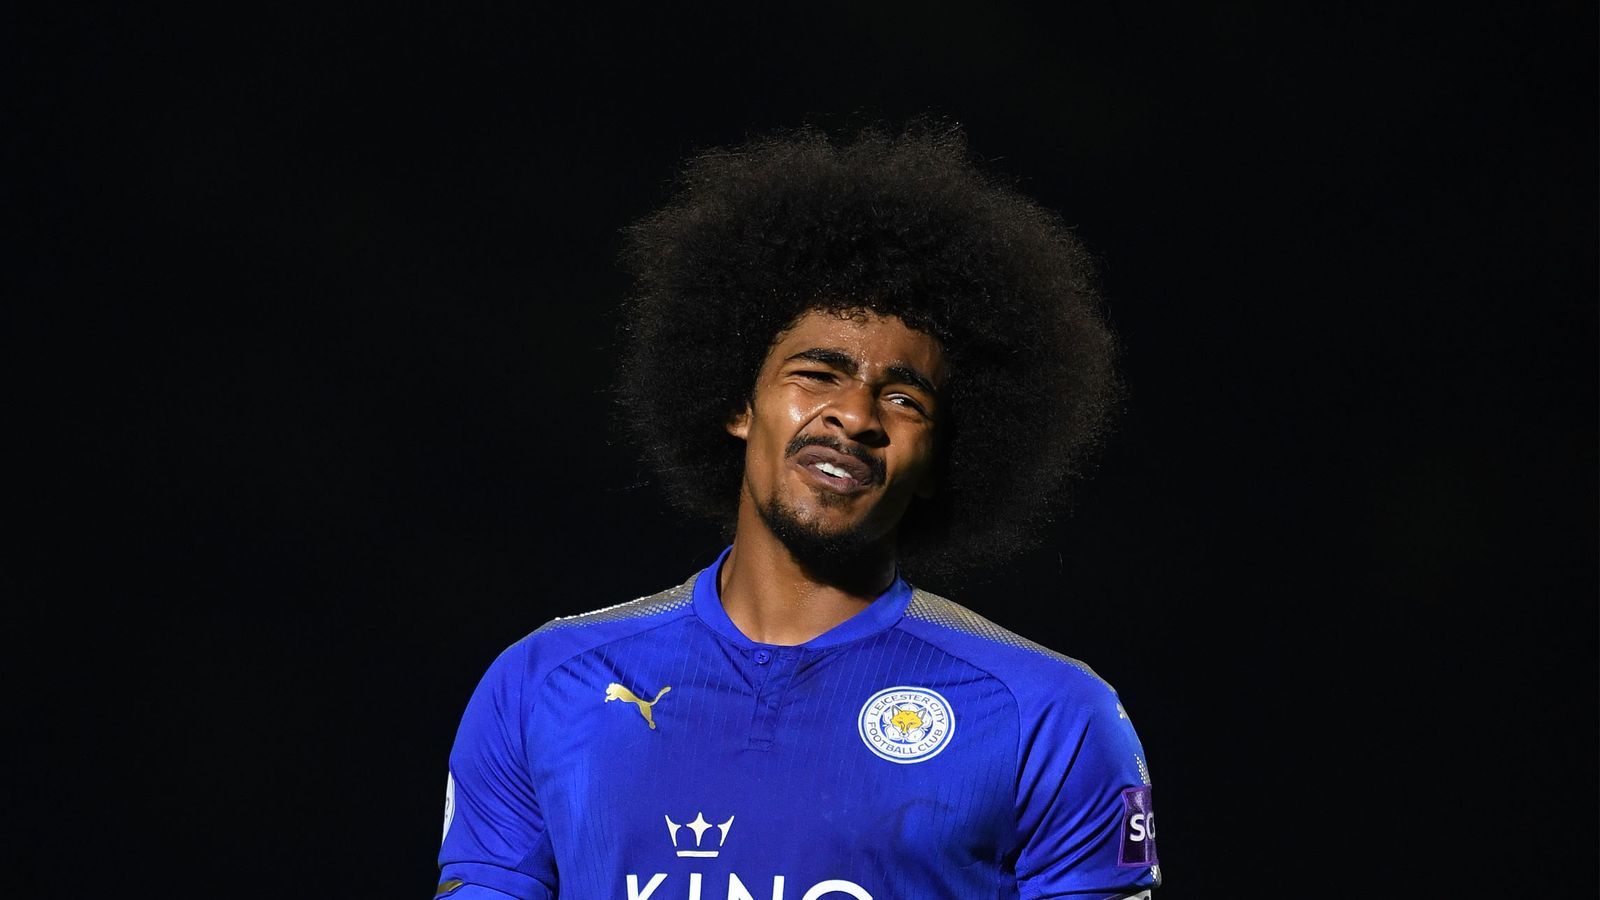 Leicester midfielder Hamza Choudhury investigated by FA for offensive tweets | Football News | Sky Sports